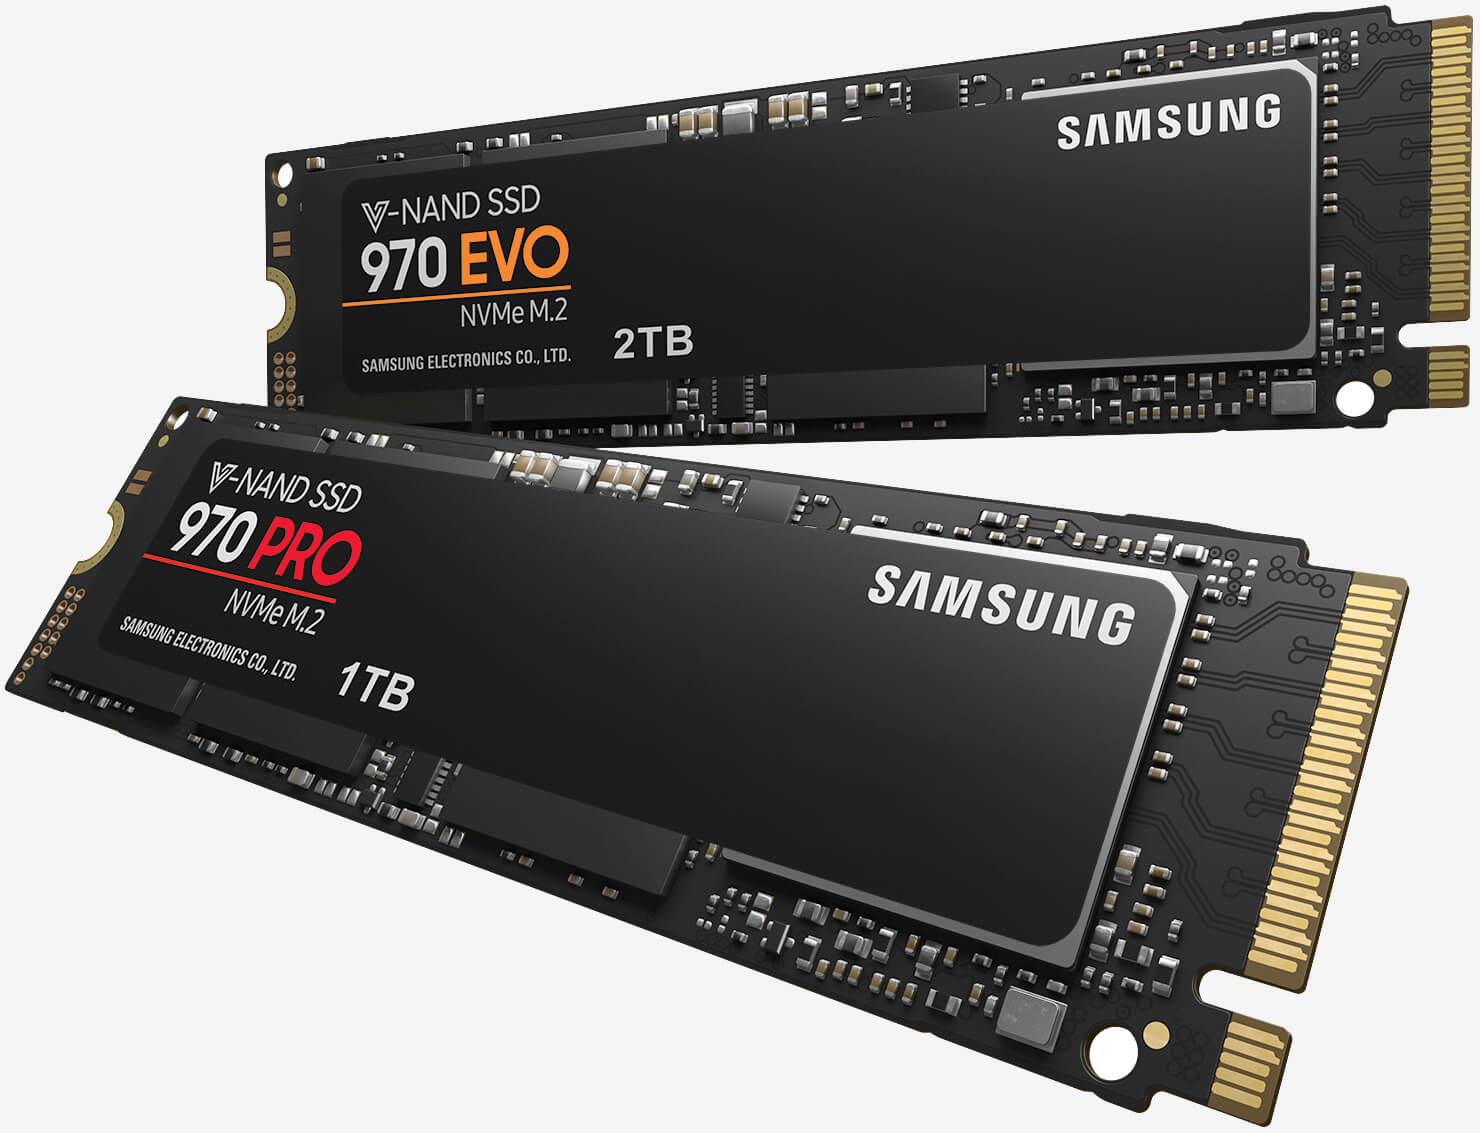 Samsung introduces the 970 Pro and 970 Evo series NVMe SSDs